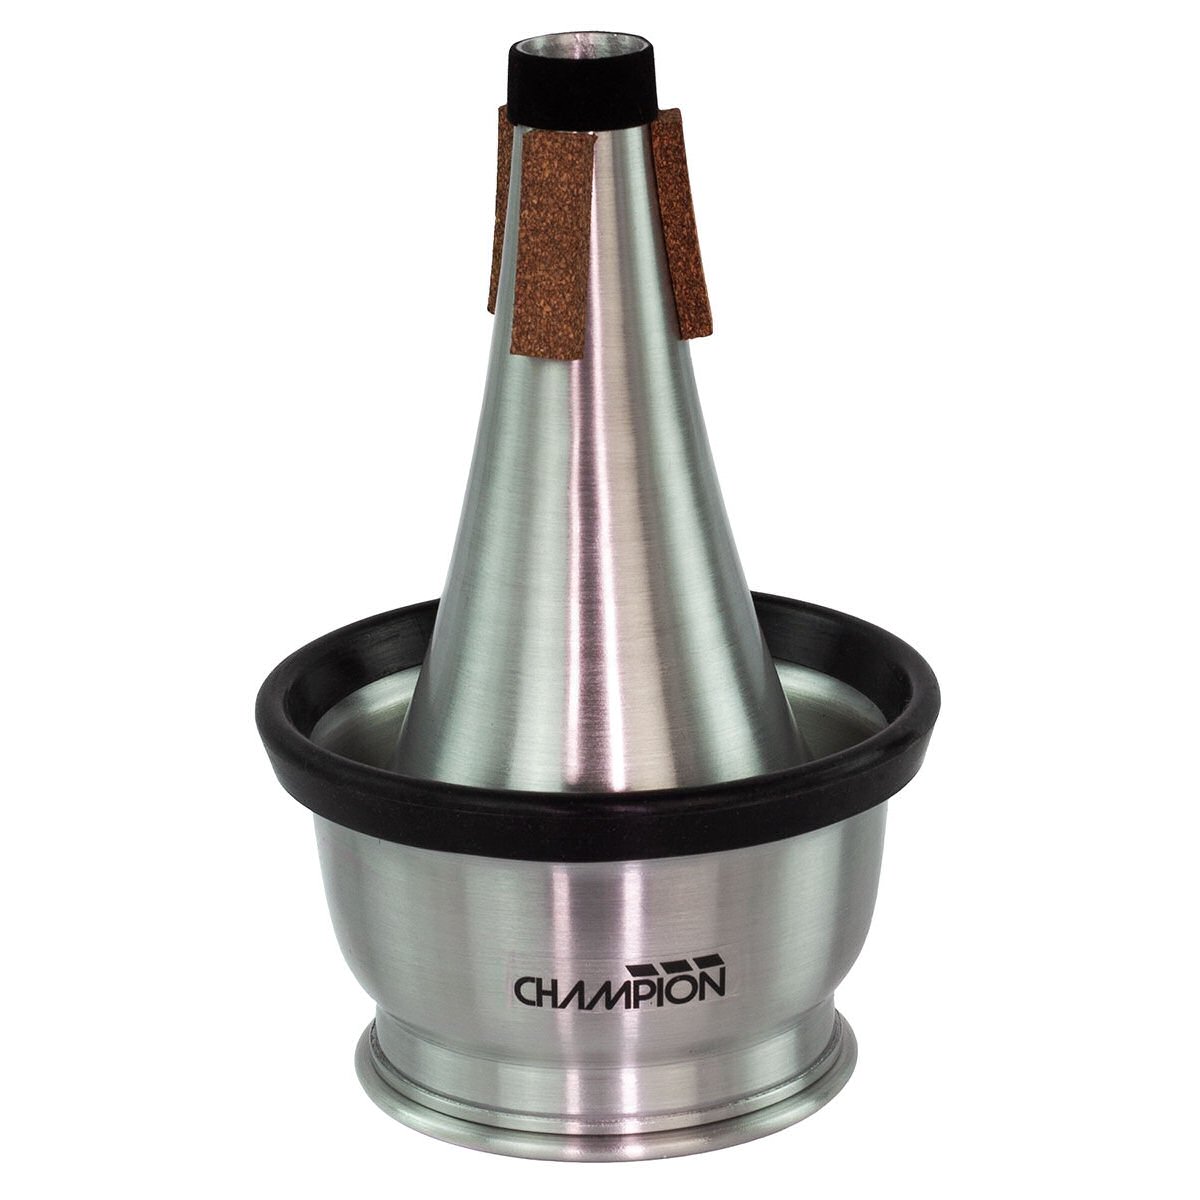 Champion Trumpet Cup Mute